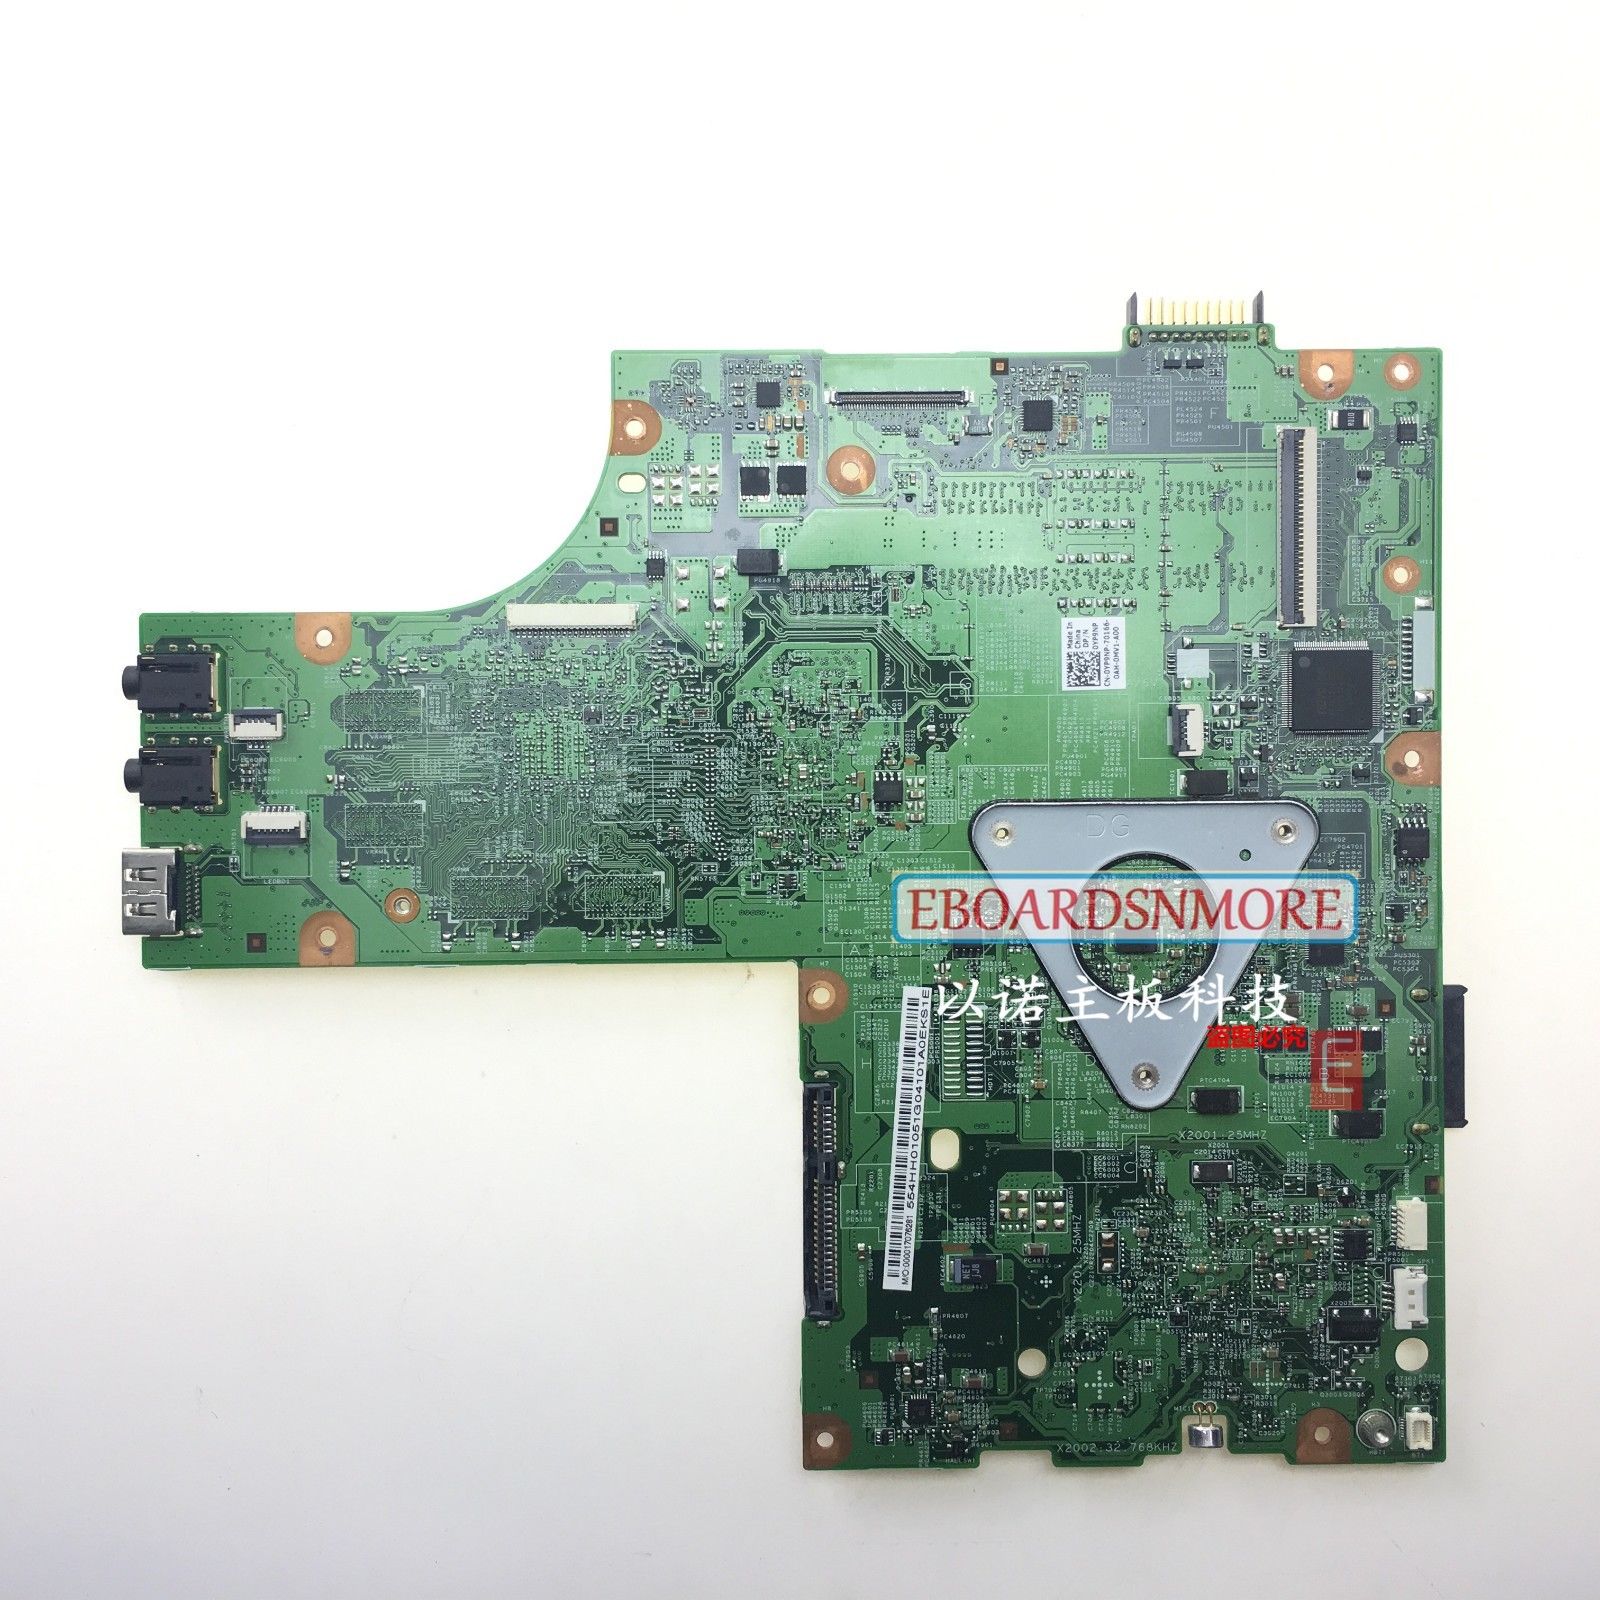 Dell Inspiron M5010 AMD Laptop Motherboard s1 0YP9NP, Free CPU included,Grade A Compatible CPU Brand: AMD Nu